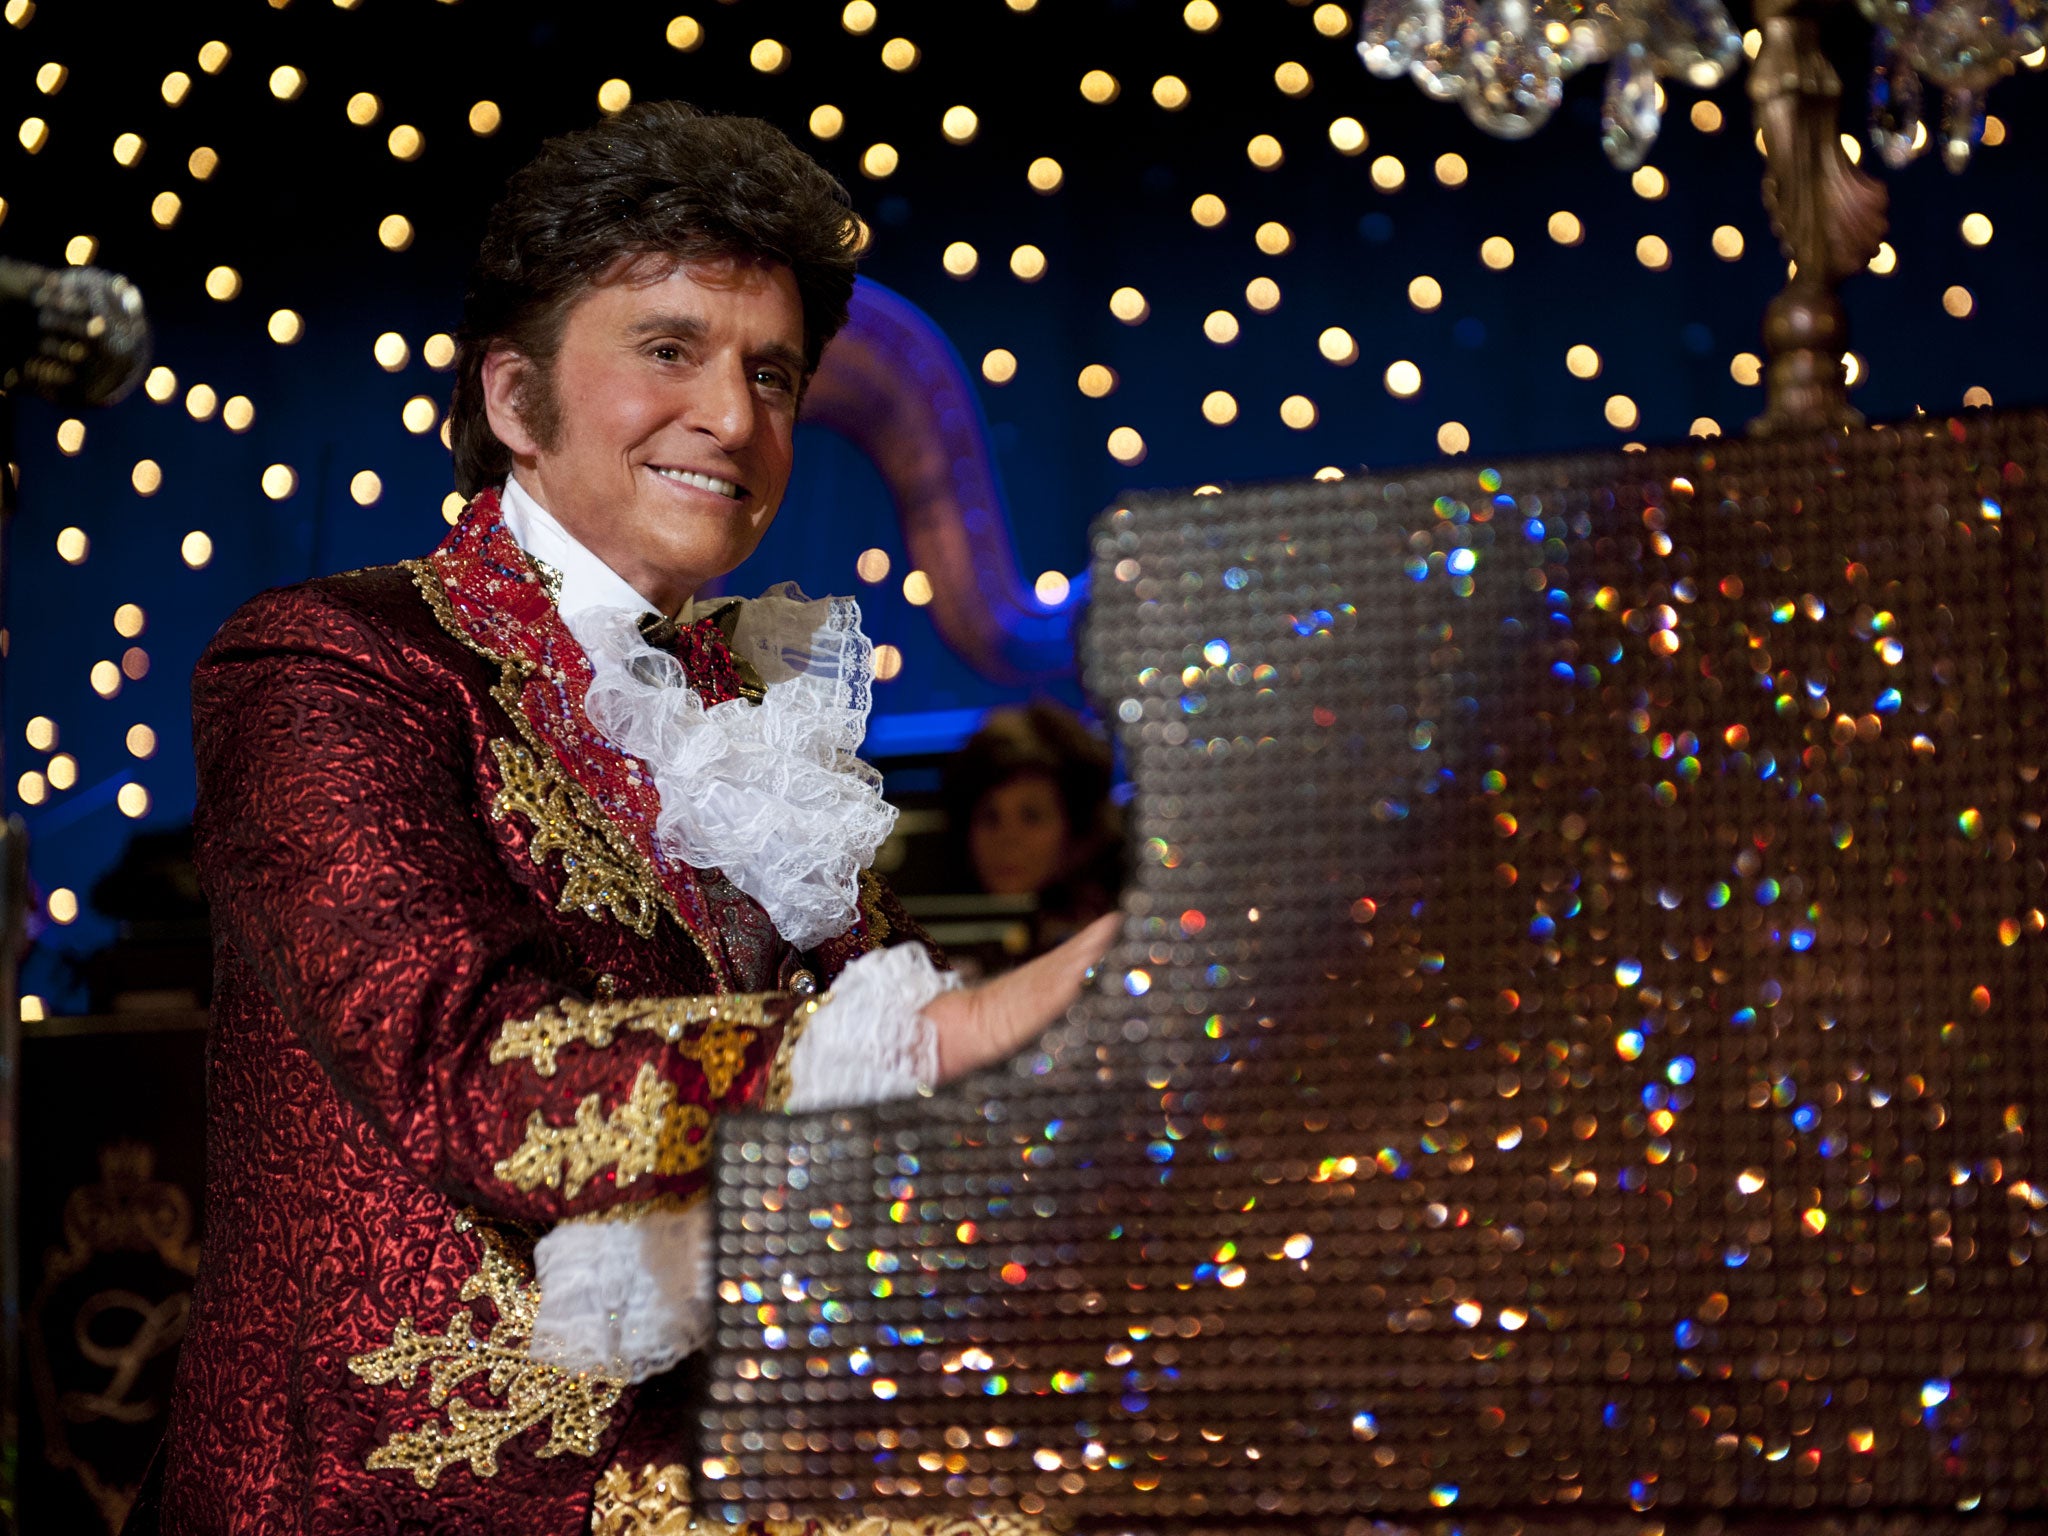 As Liberace, Douglas’s macho image falls away with one twinkle of an eyelid